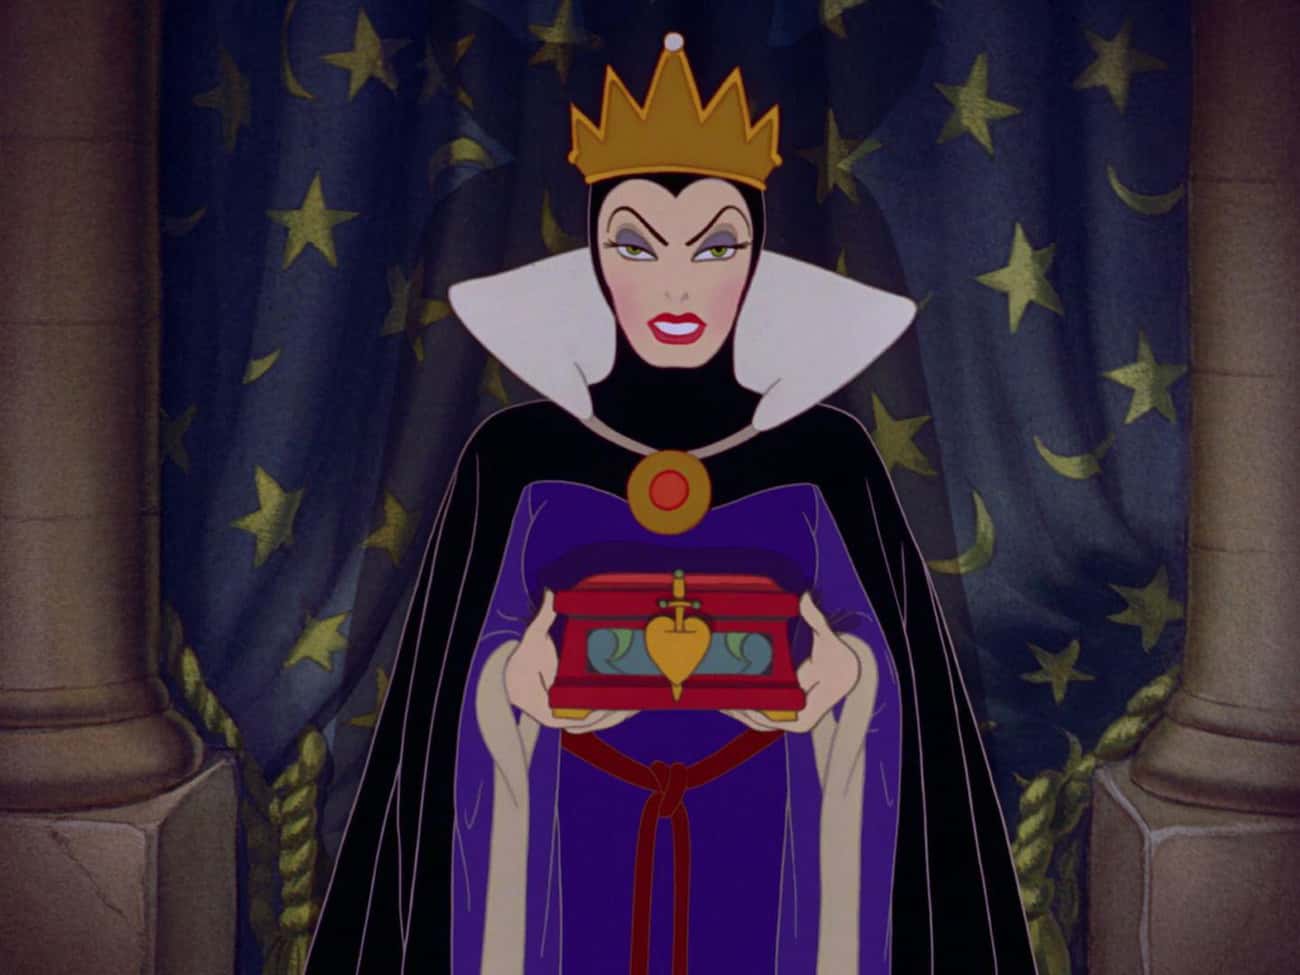 Evil Queen, 'Snow White and the Seven Dwarfs' 